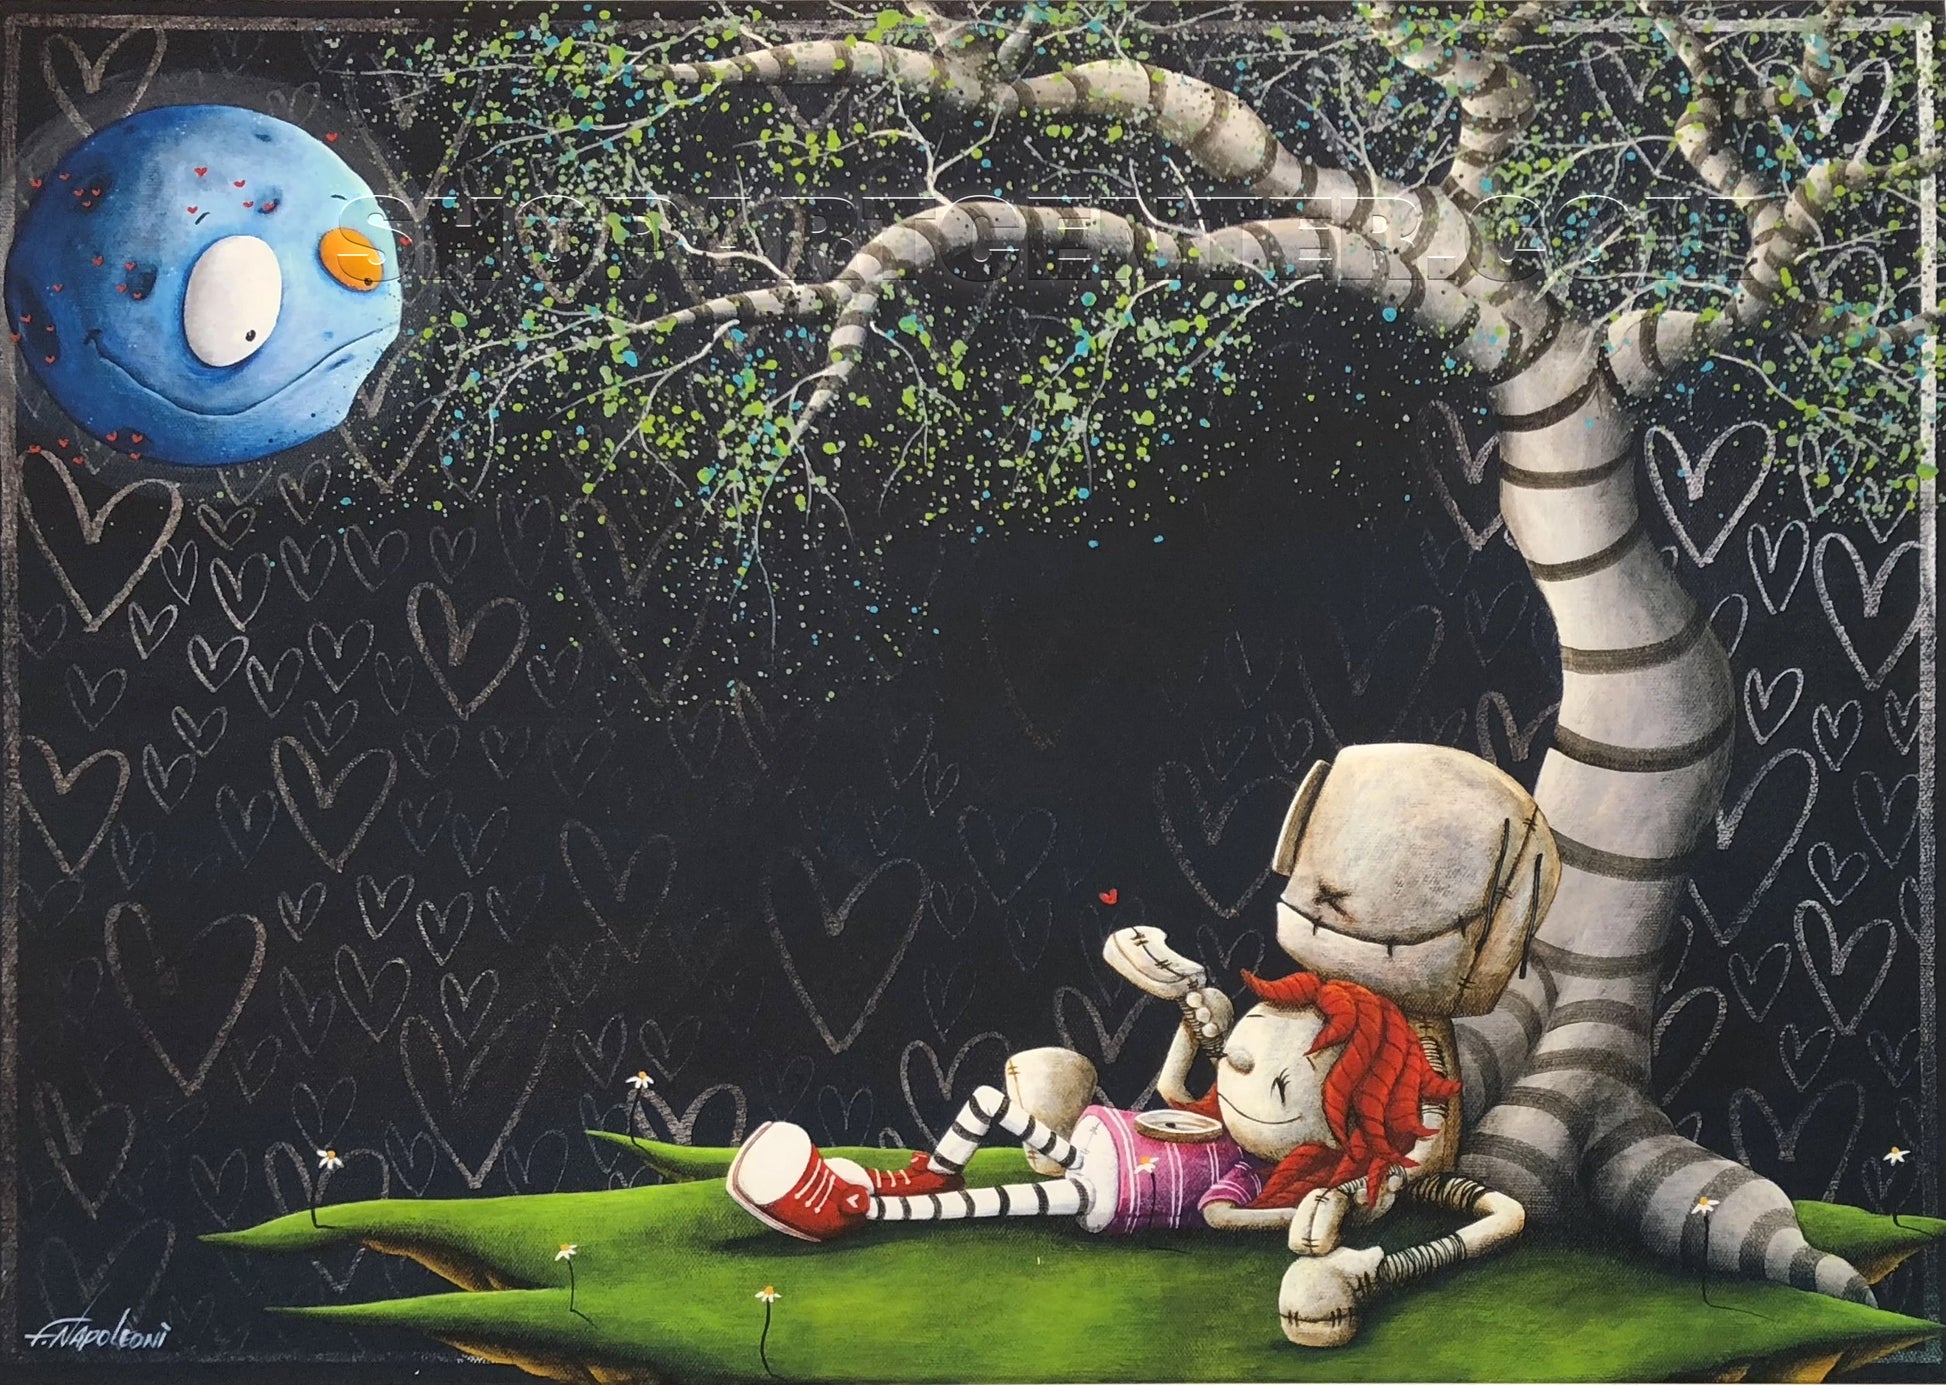 Fabio Napoleoni "To the Moon and Back" Limited Edition Paper Giclee